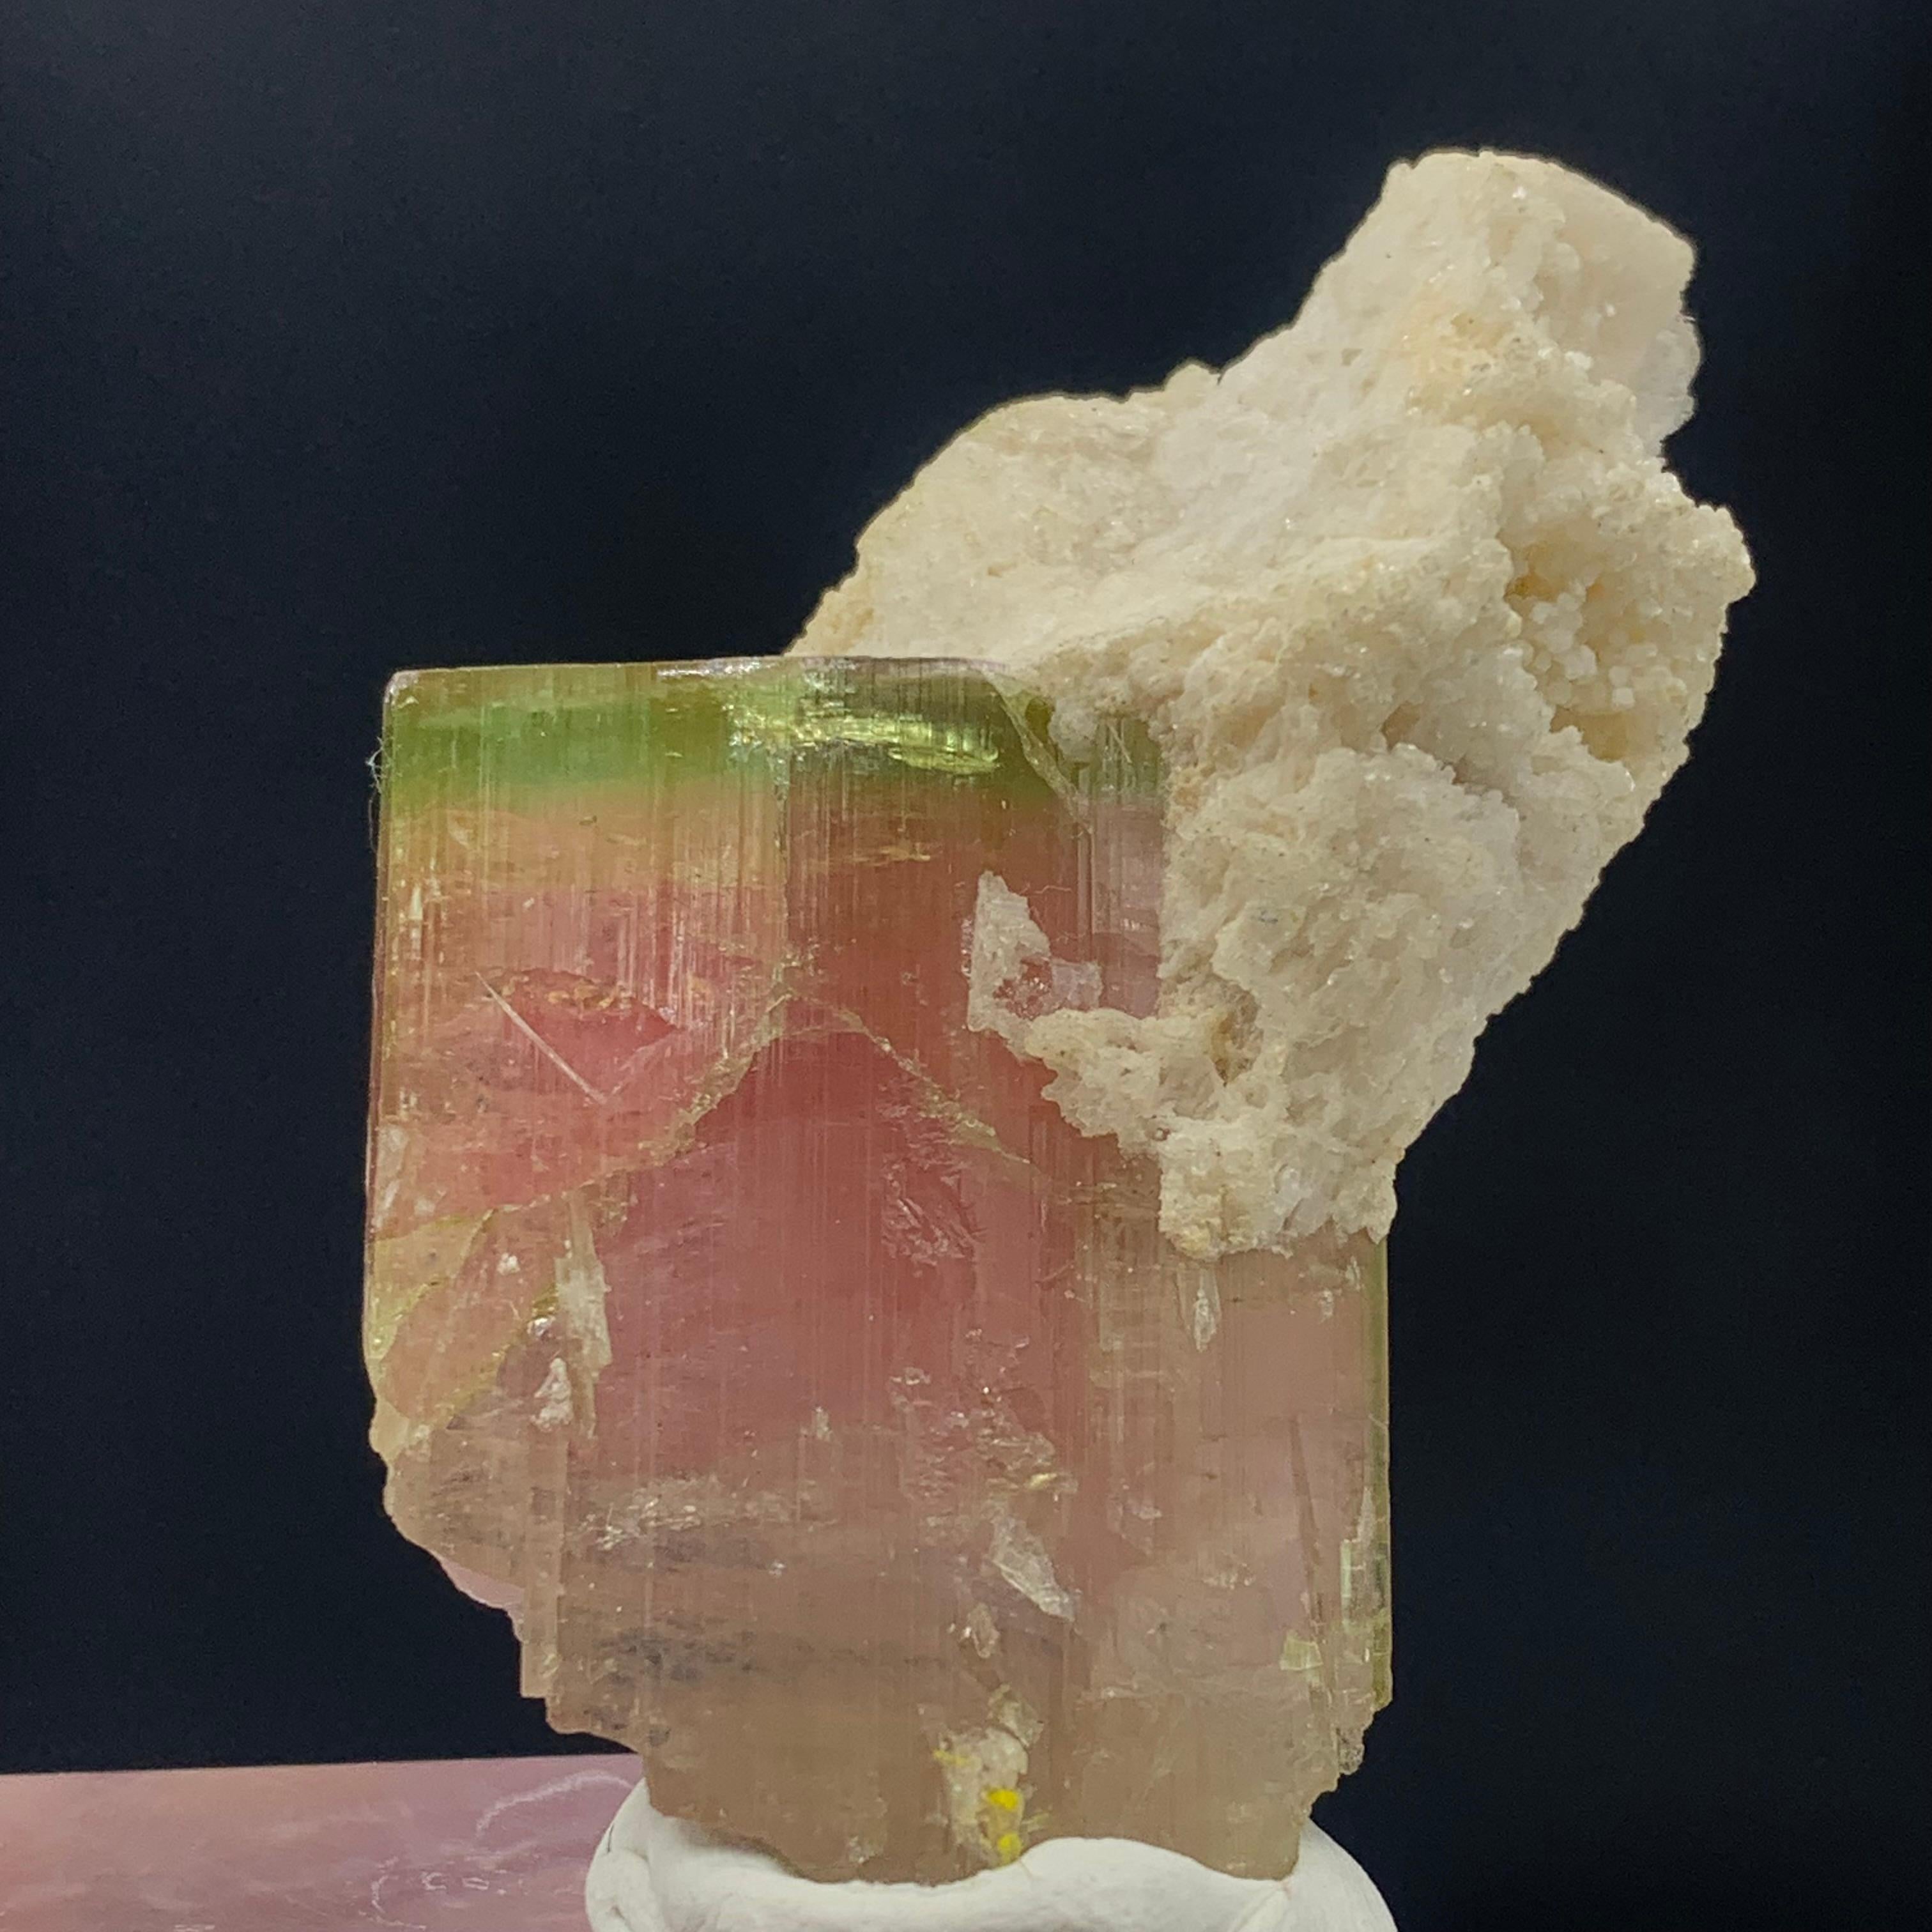 Beautiful Bi-Color Tourmaline With Albite From Afghanistan
WEIGHT: 101.35 Carat
DIMENSIONS: 4.5 x 3.4 x 1.5 Cm
ORIGIN: Nuristan, Afghanistan
TREATMENT: None

Tourmaline is an extremely popular gemstone; the name Tourmaline is derived from